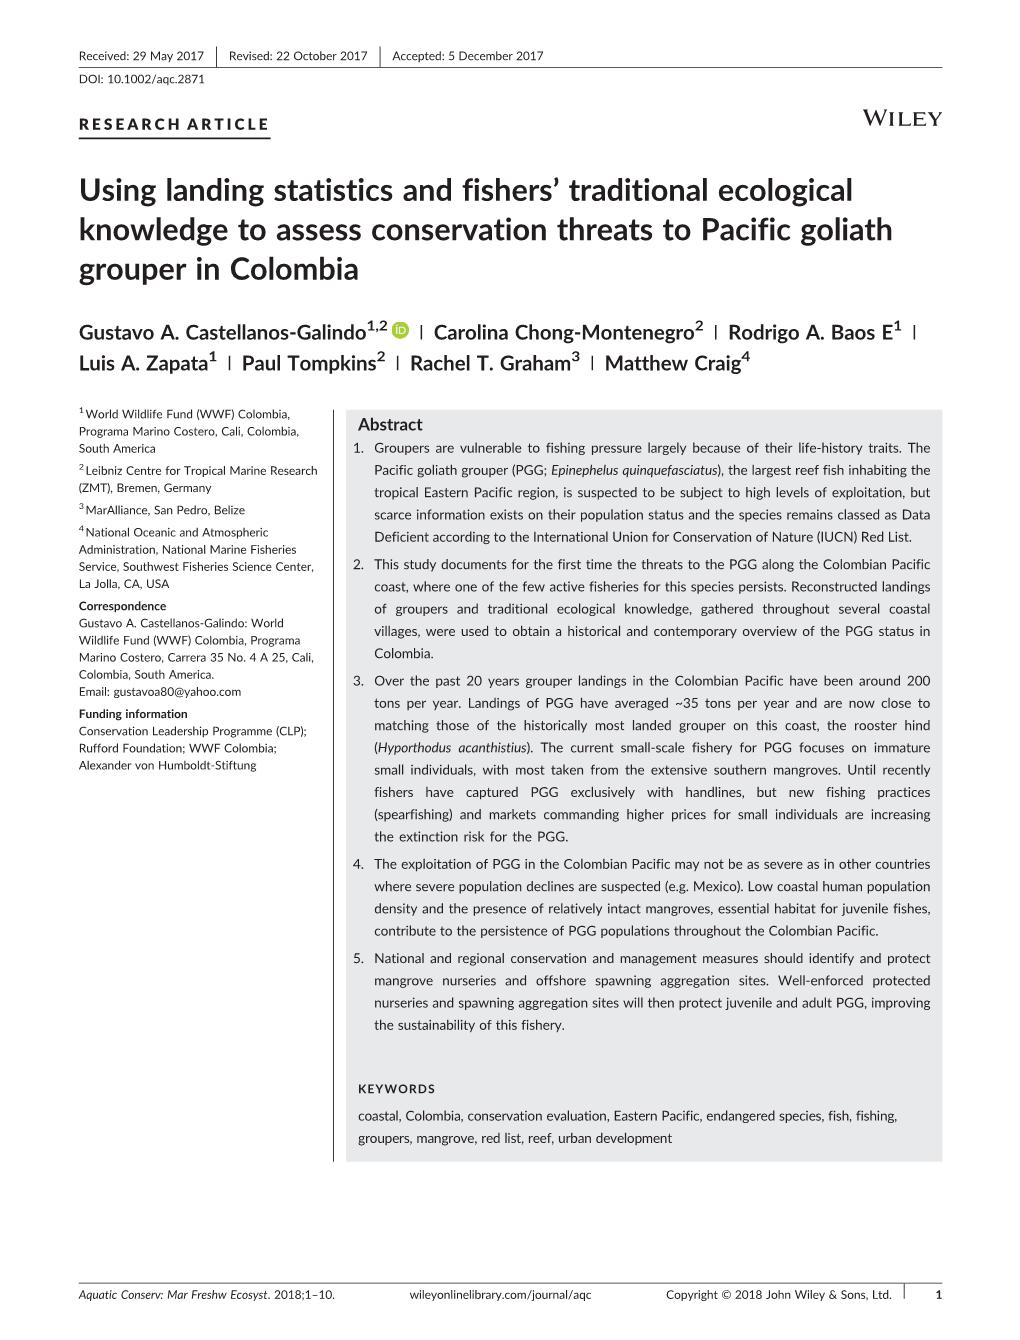 Using Landing Statistics and Fishers Traditional Ecological Knowledge To